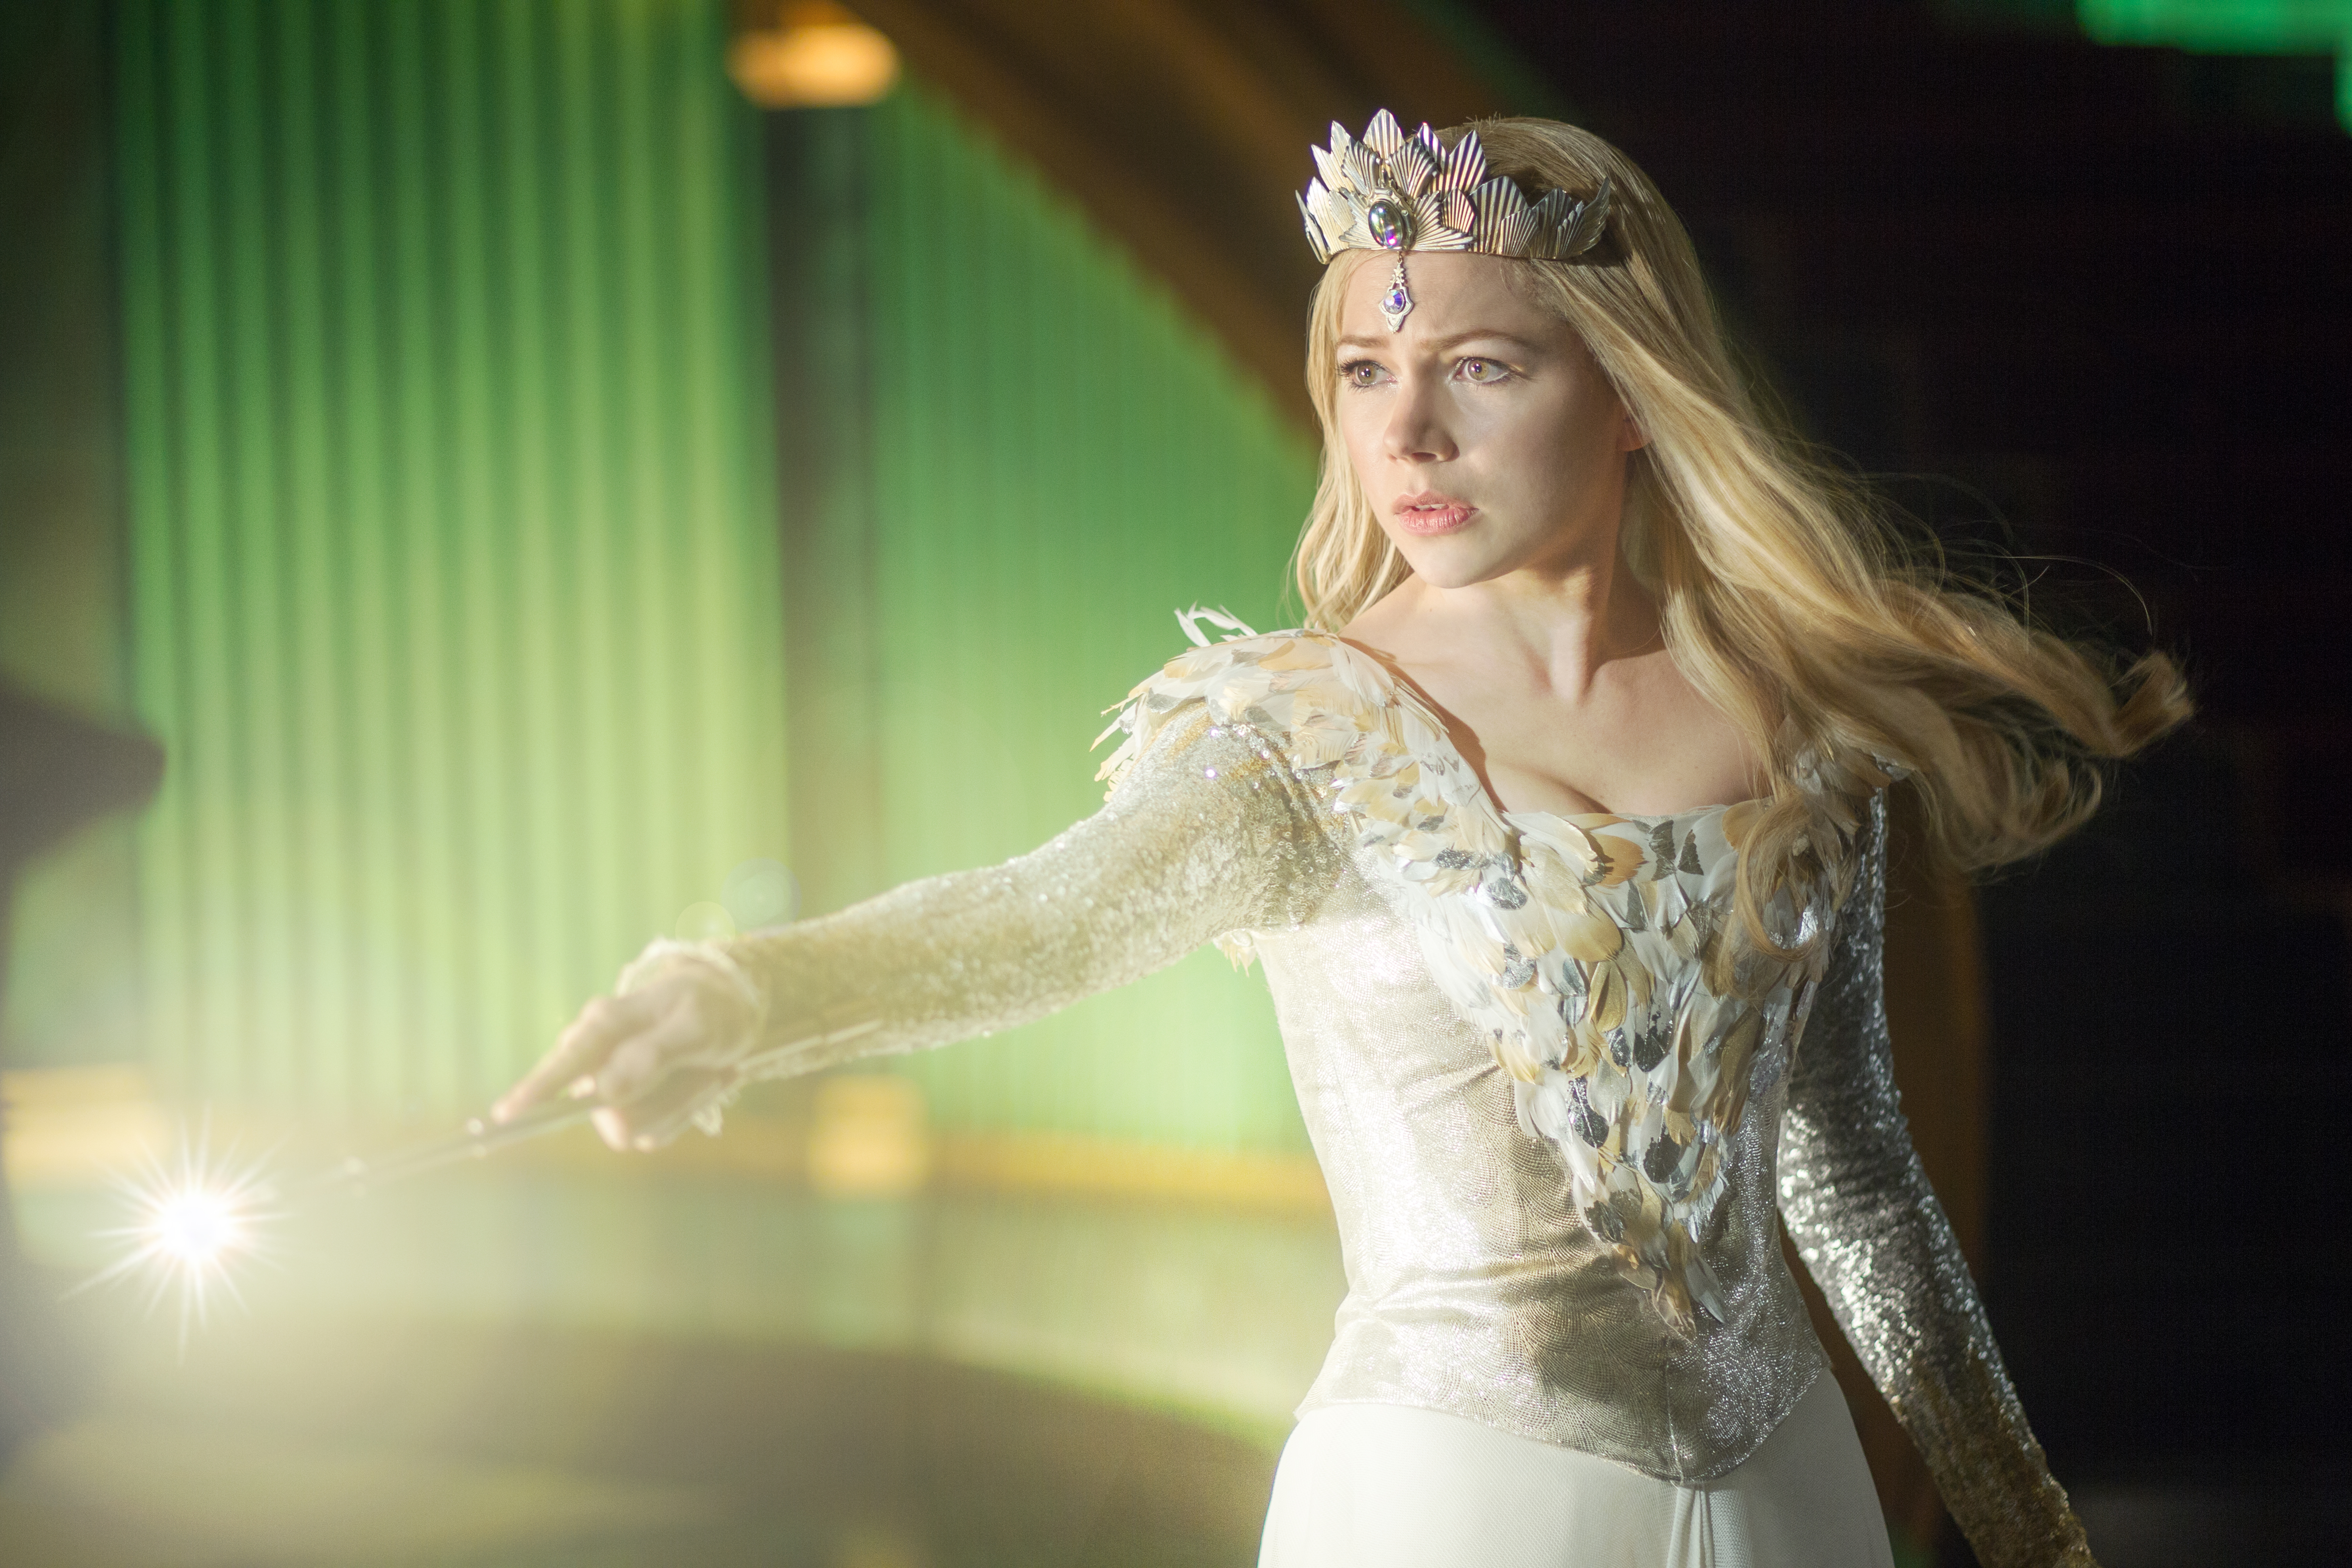 "OZ: THE GREAT AND POWERFUL" Michelle Williams center Ph: Merie Weismiller Wallace, SMPSP ©Disney Enterprises, Inc. All Rights Reserved.